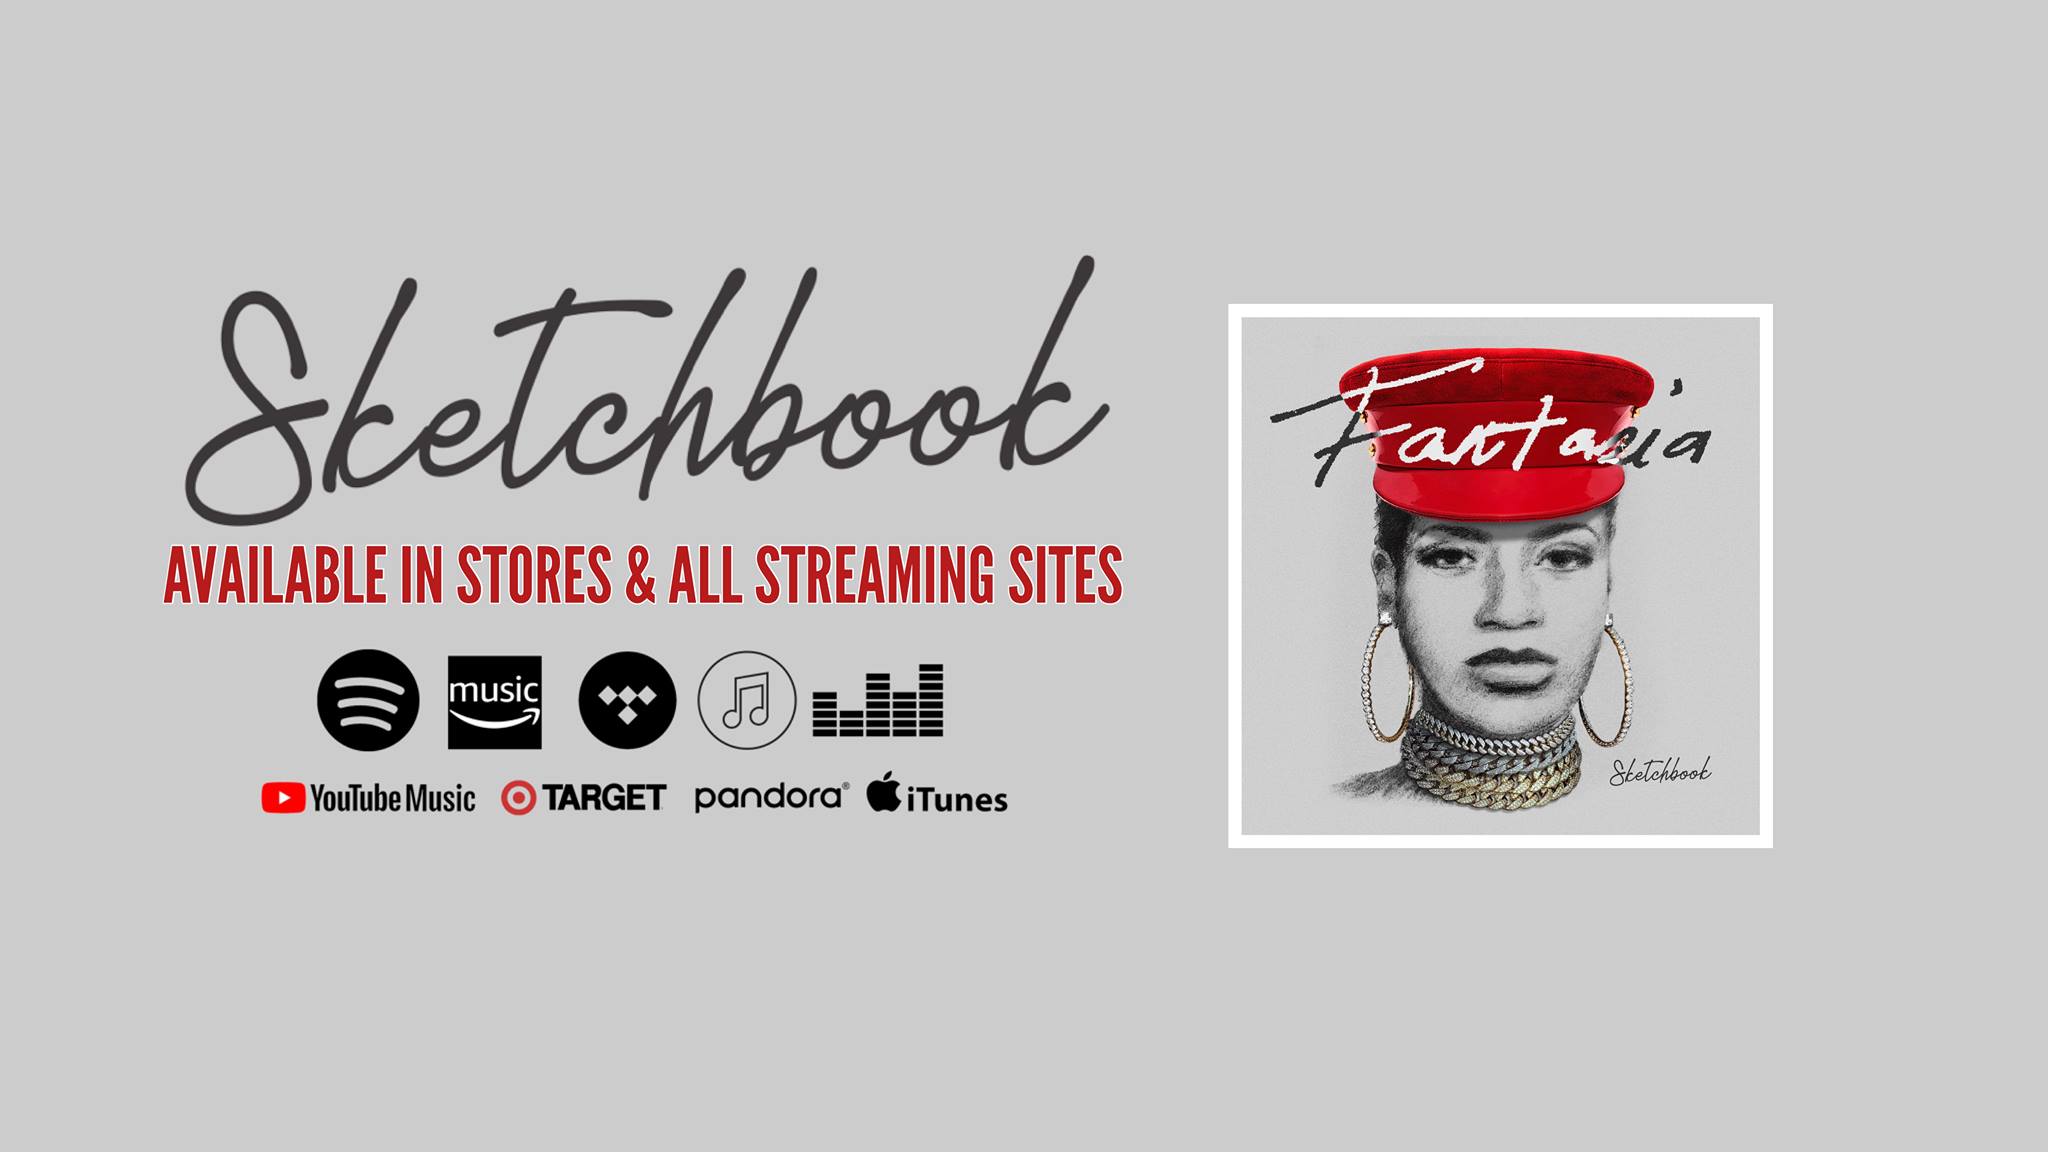 Sketchbook - Available in stores and all streaming sites